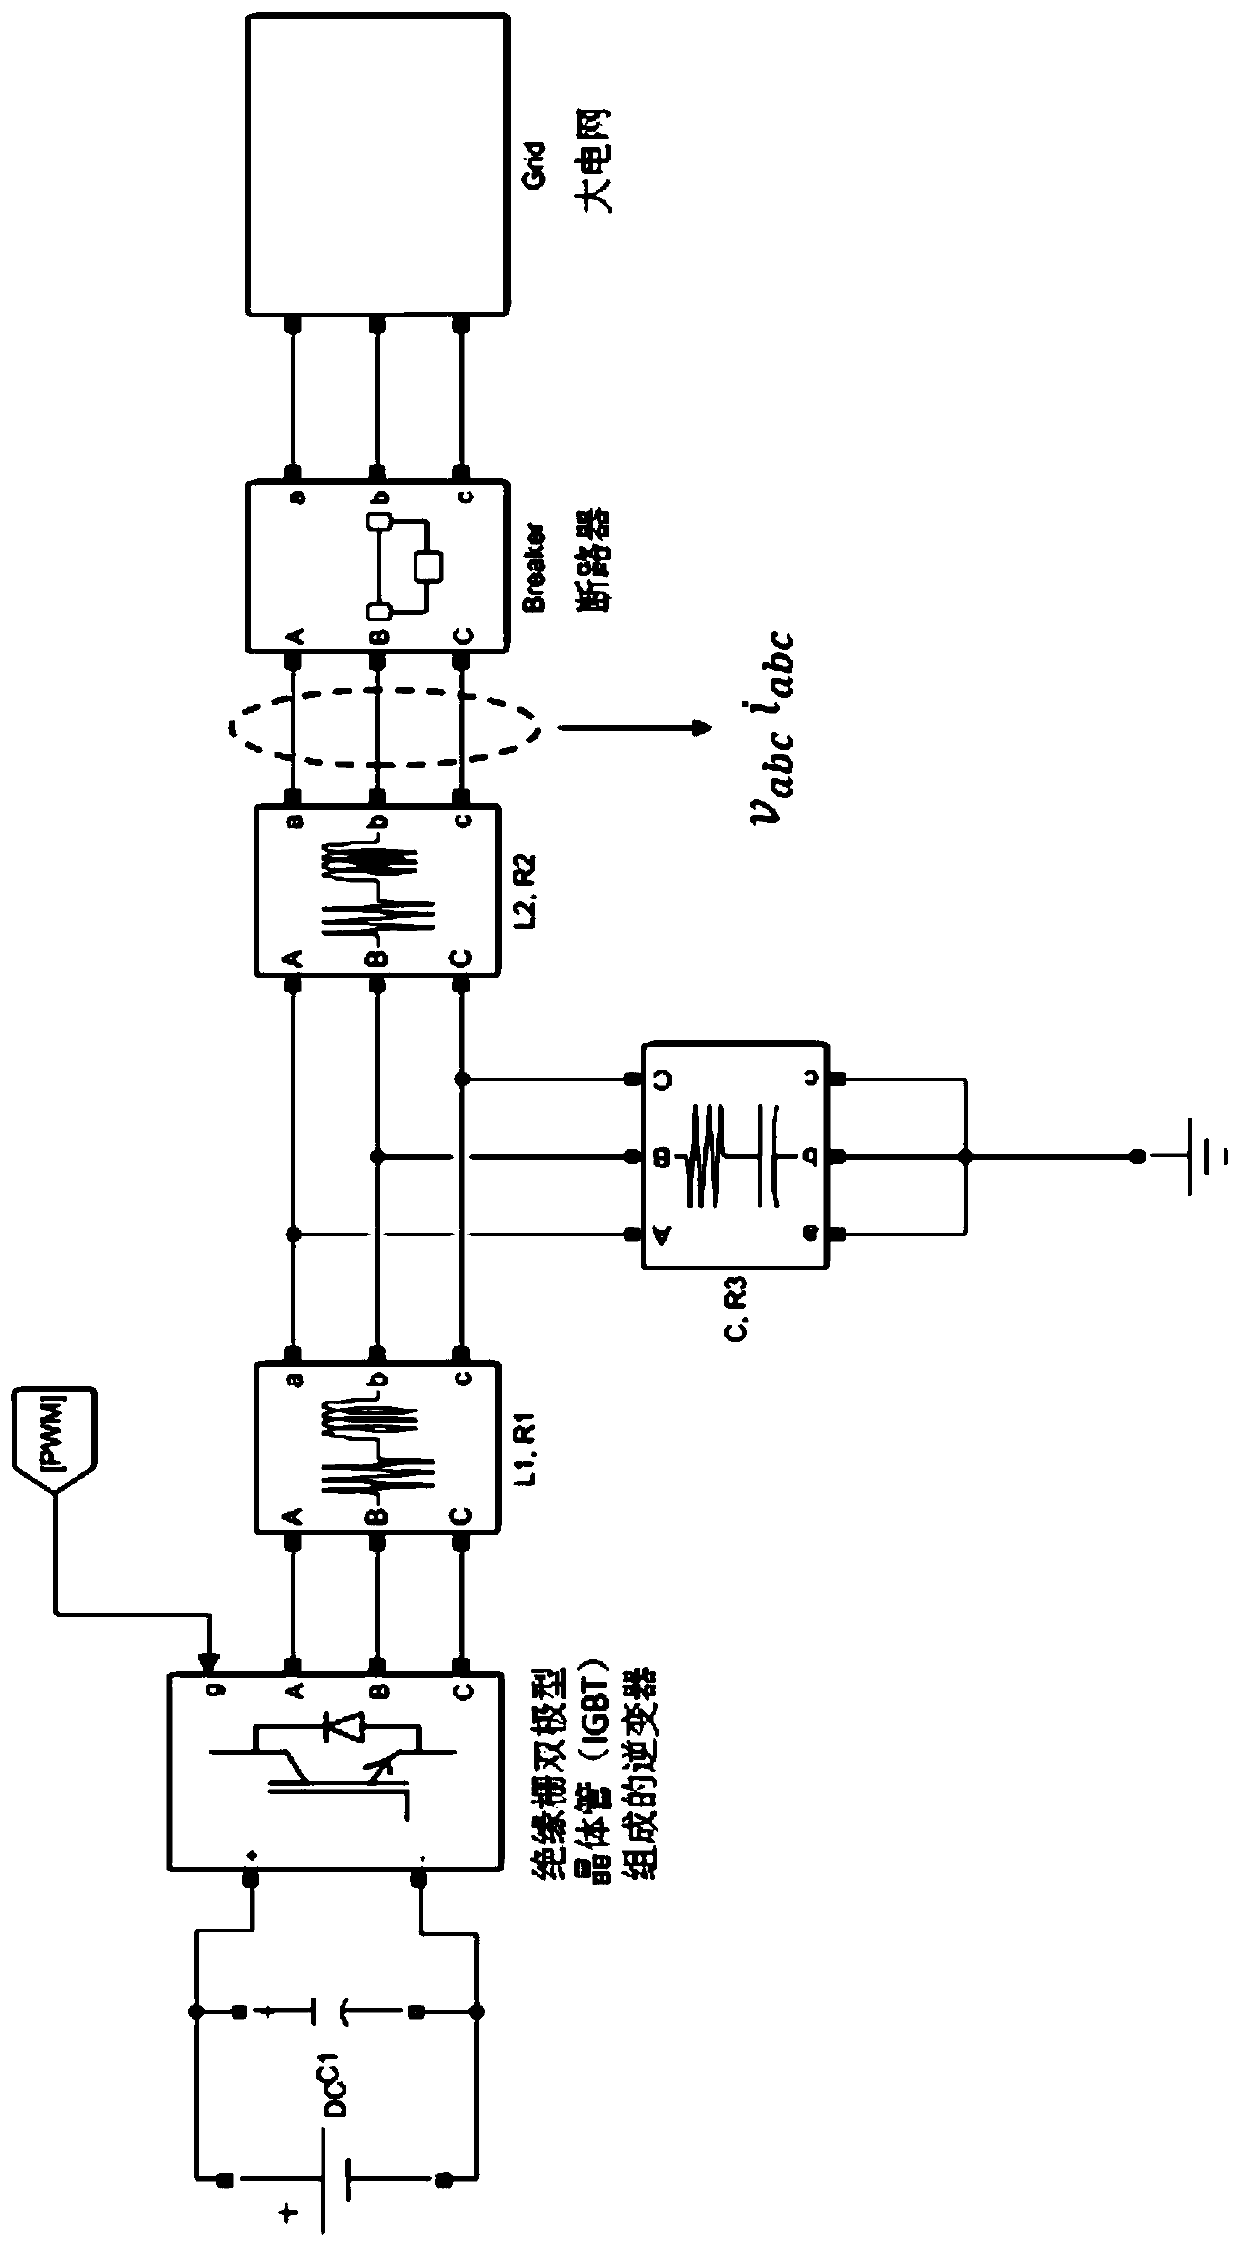 A nonlinear adaptive pq control method for inverters in grid-connected state